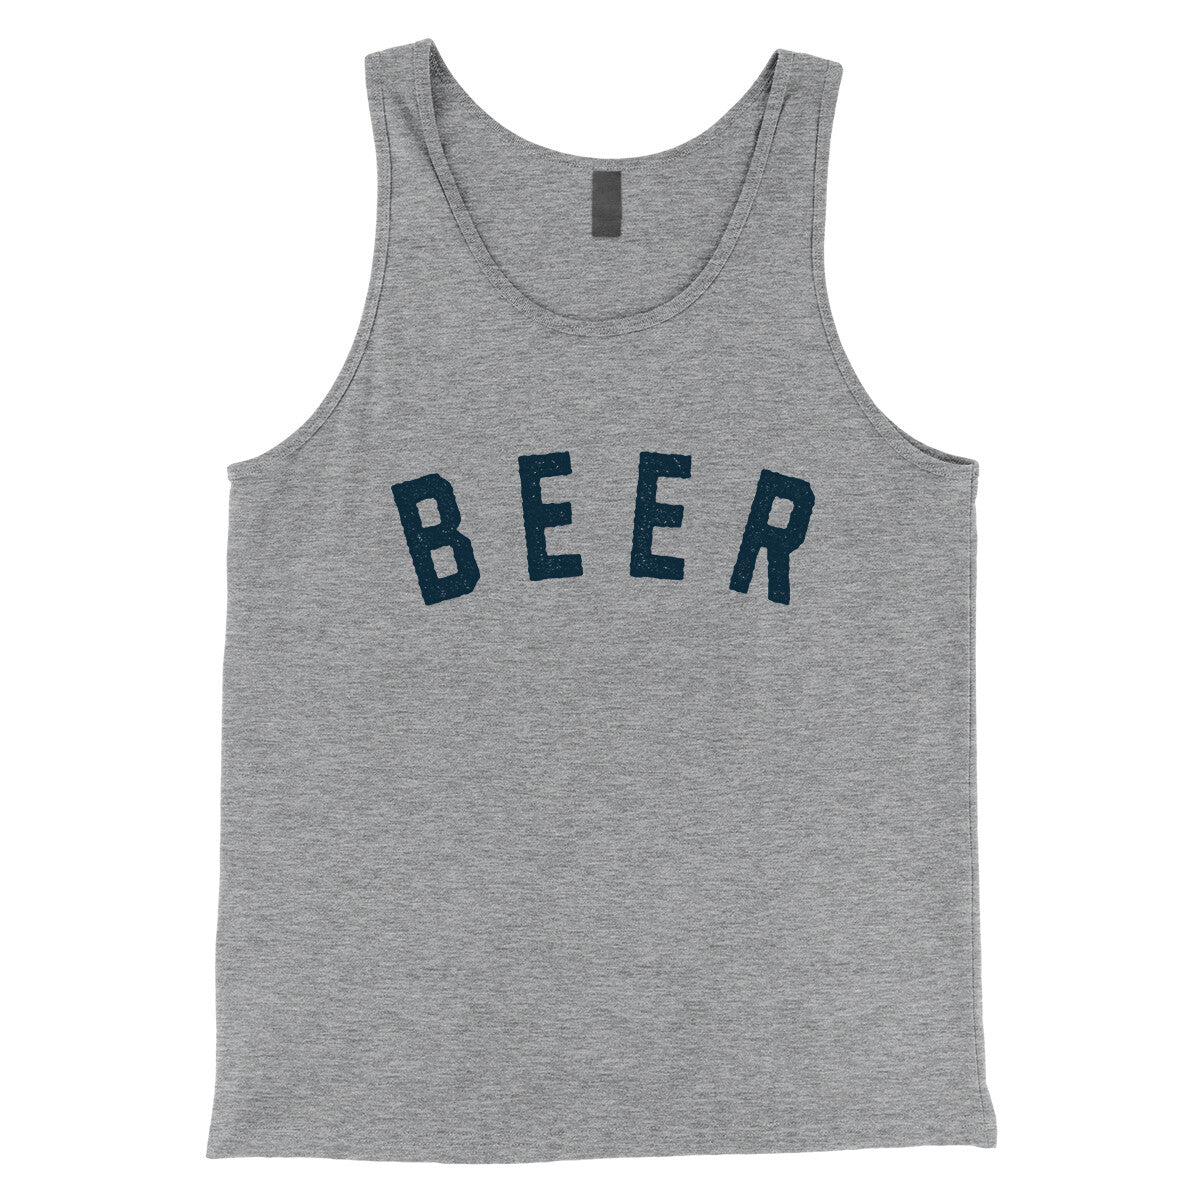 Beer in Athletic Heather Color